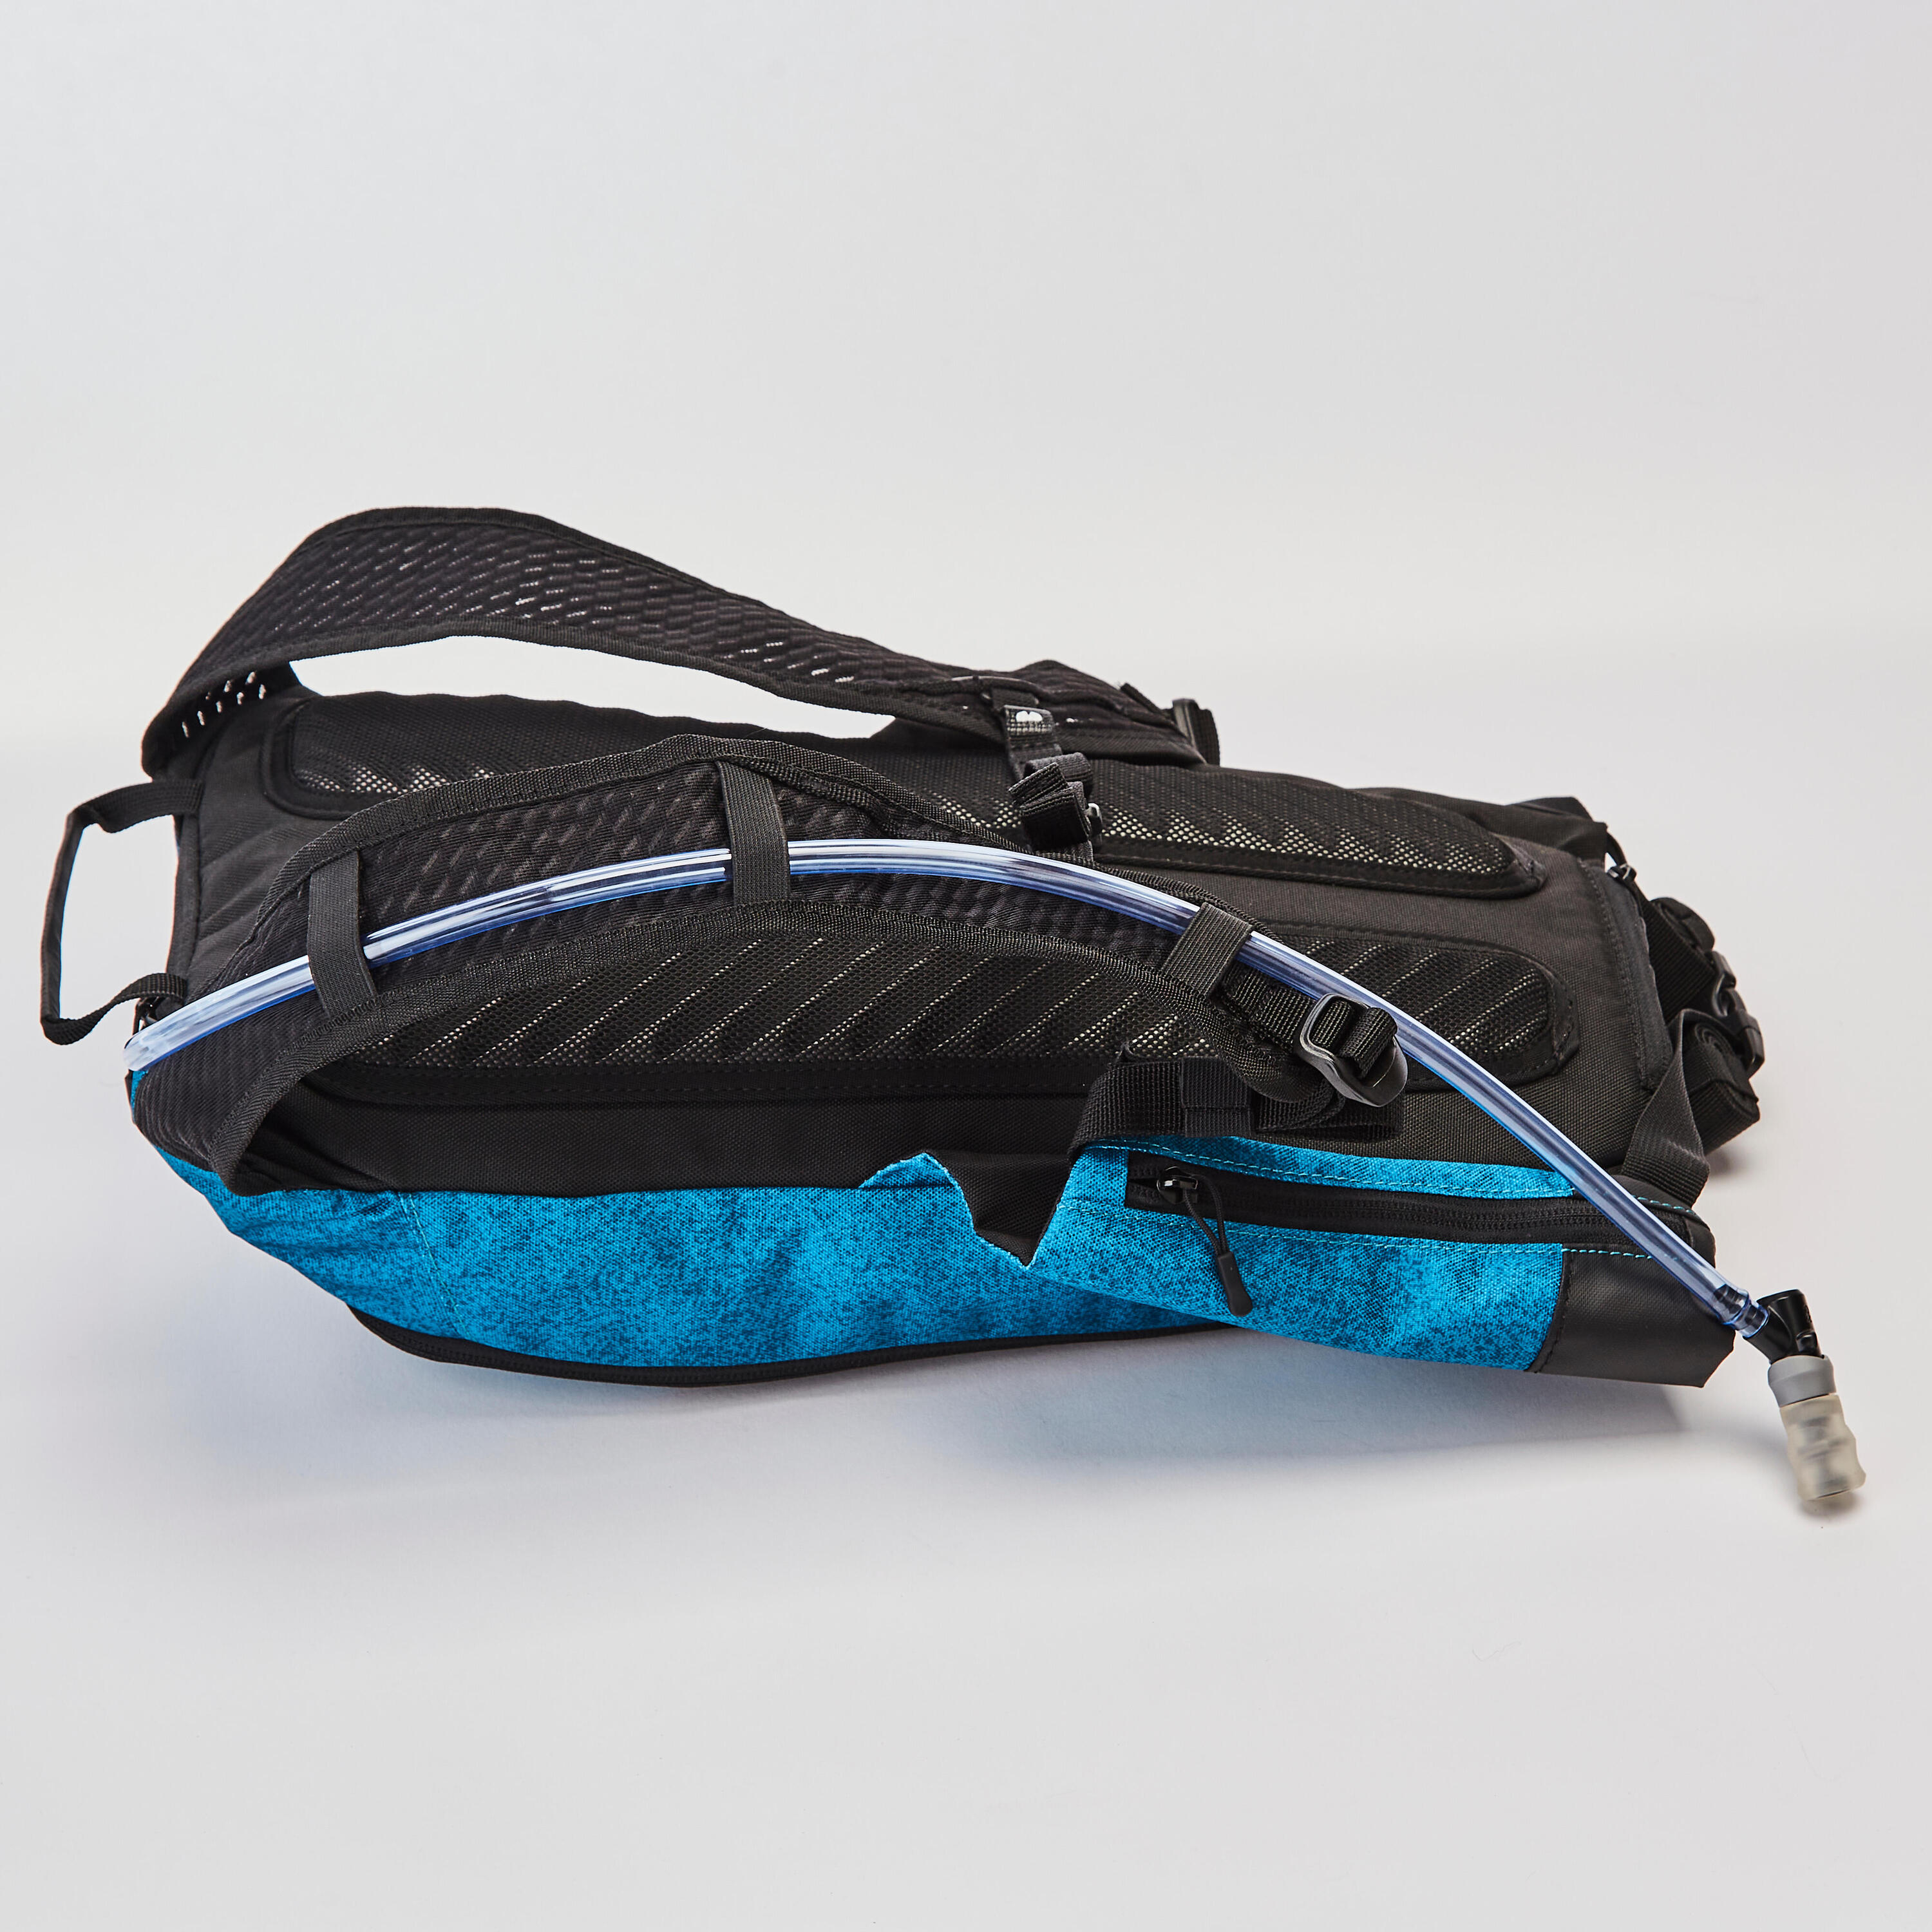 Mountain Bike Hydration Backpack Explore 7L/2L Water - Turquoise Blue 8/18